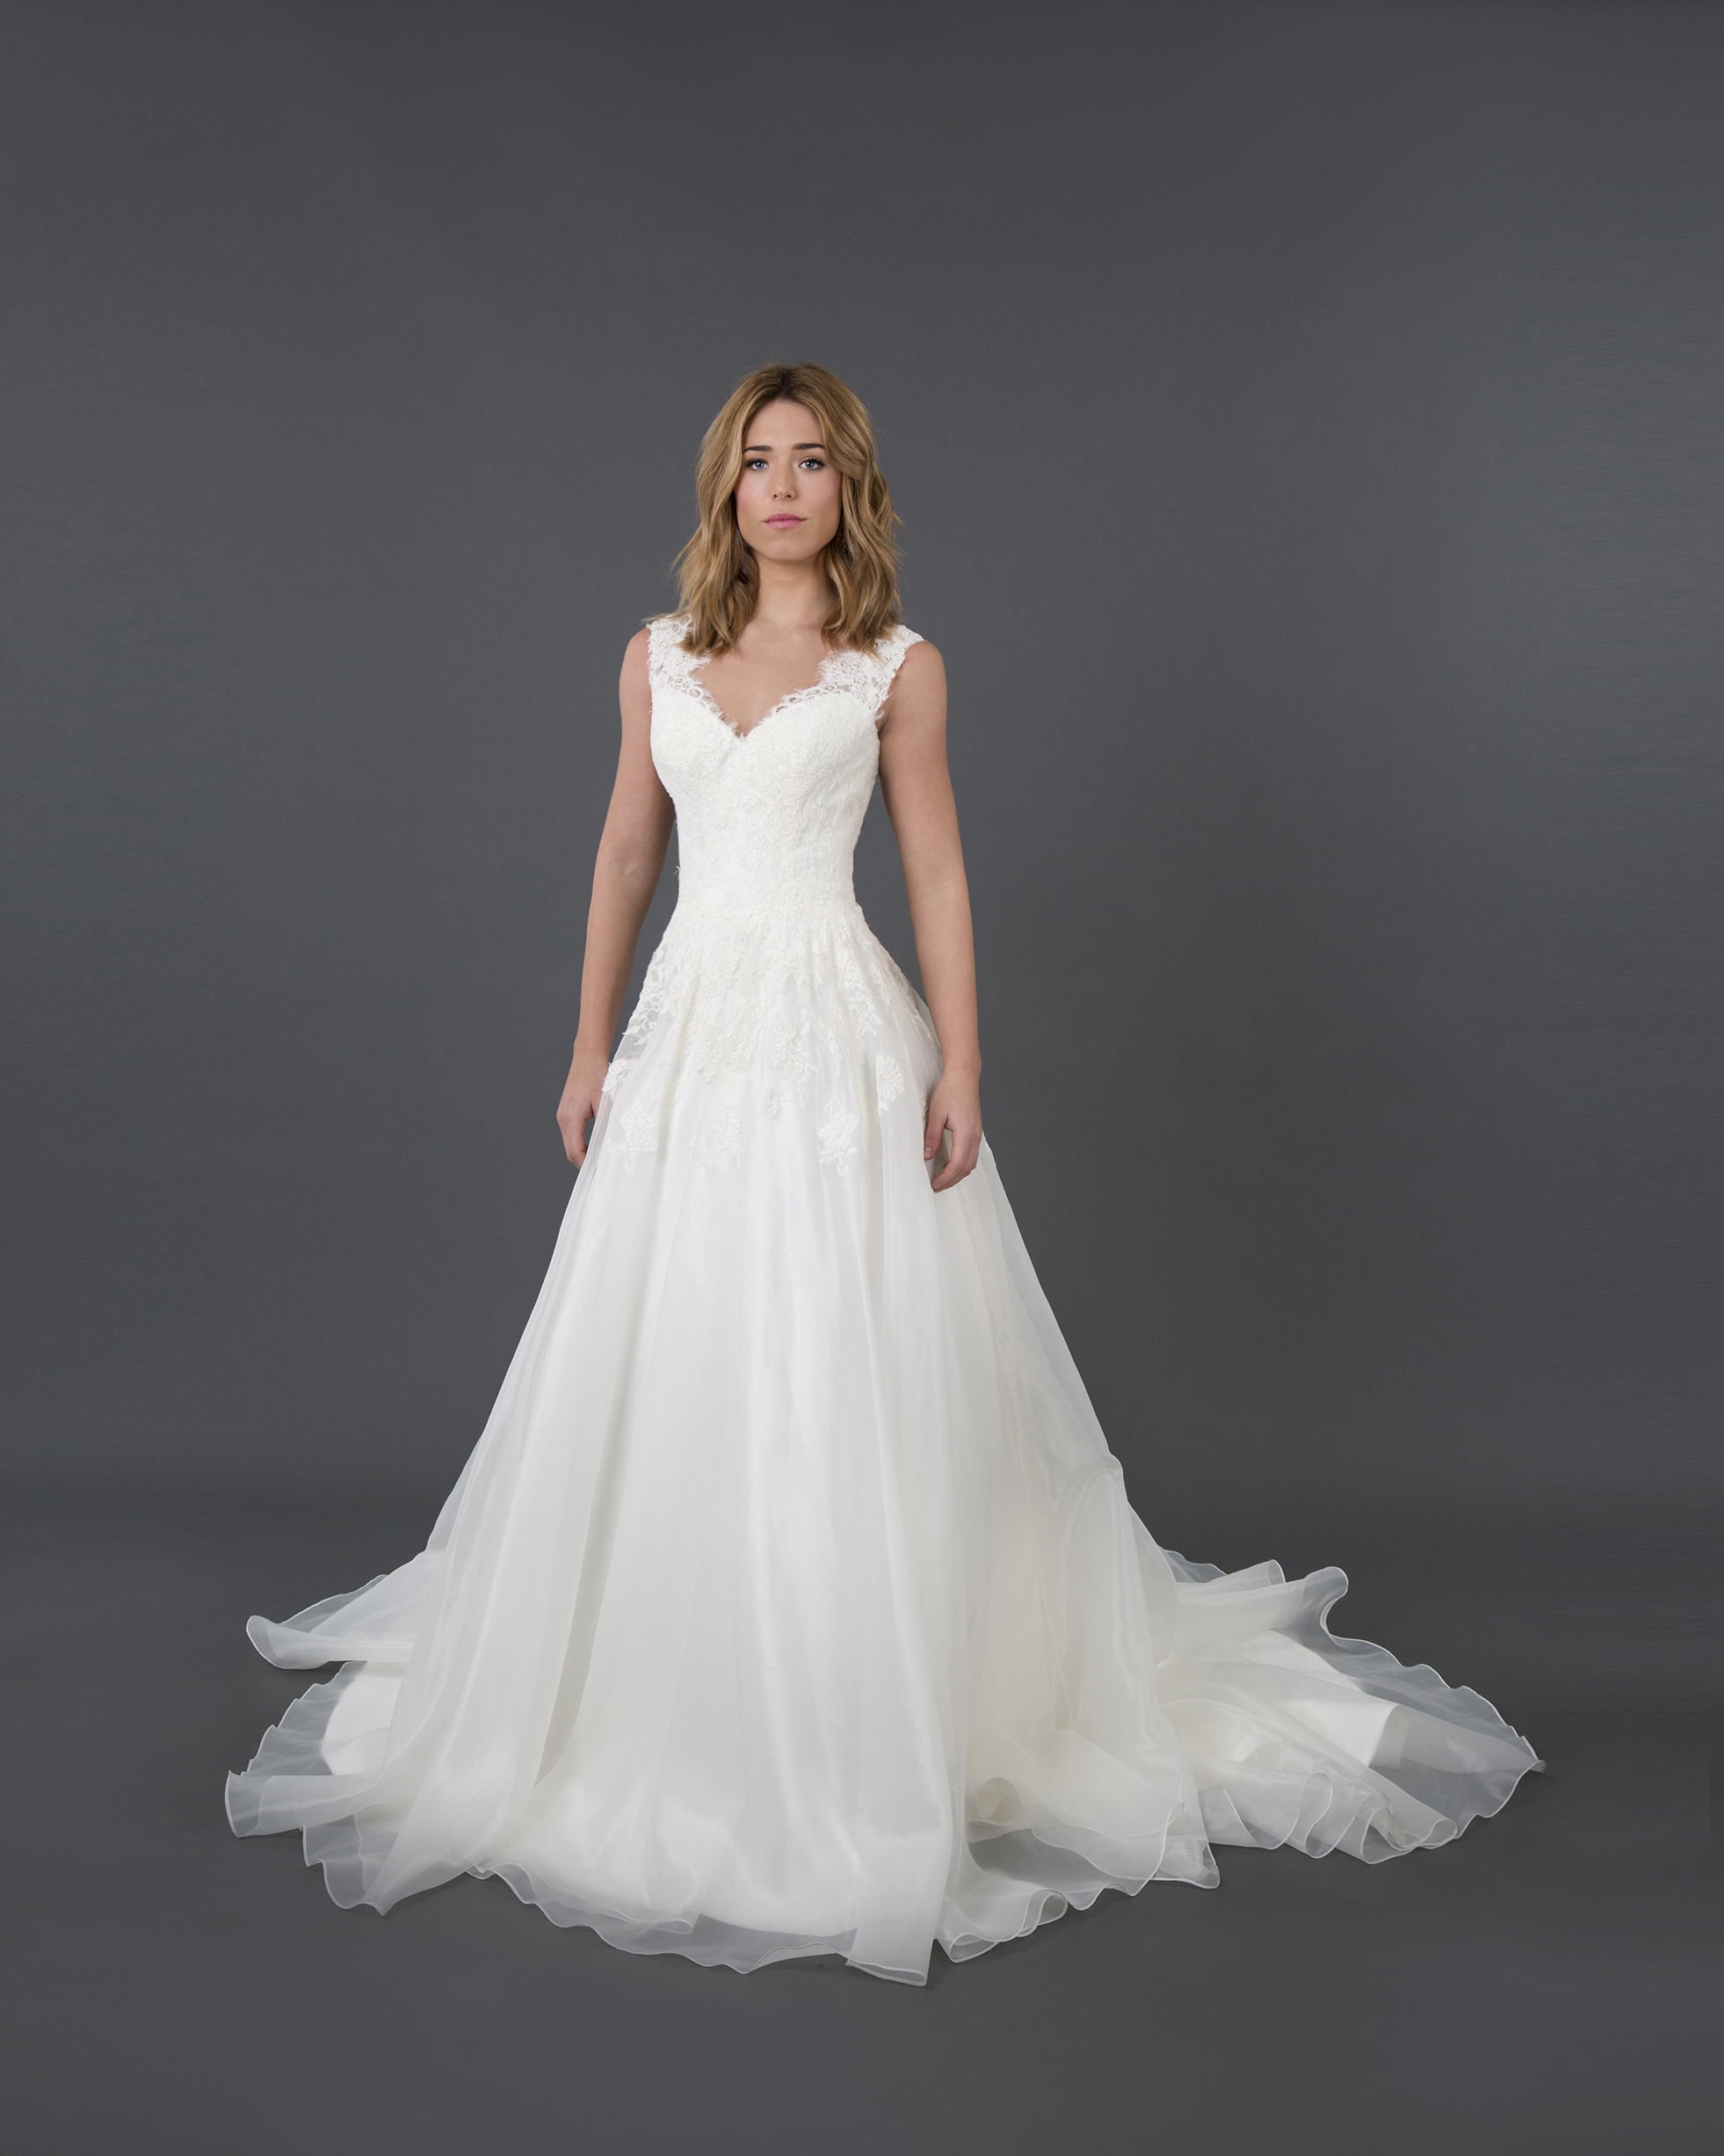 Angela Dress, a full gown dress with a bodice in lace and skirt in chiffon